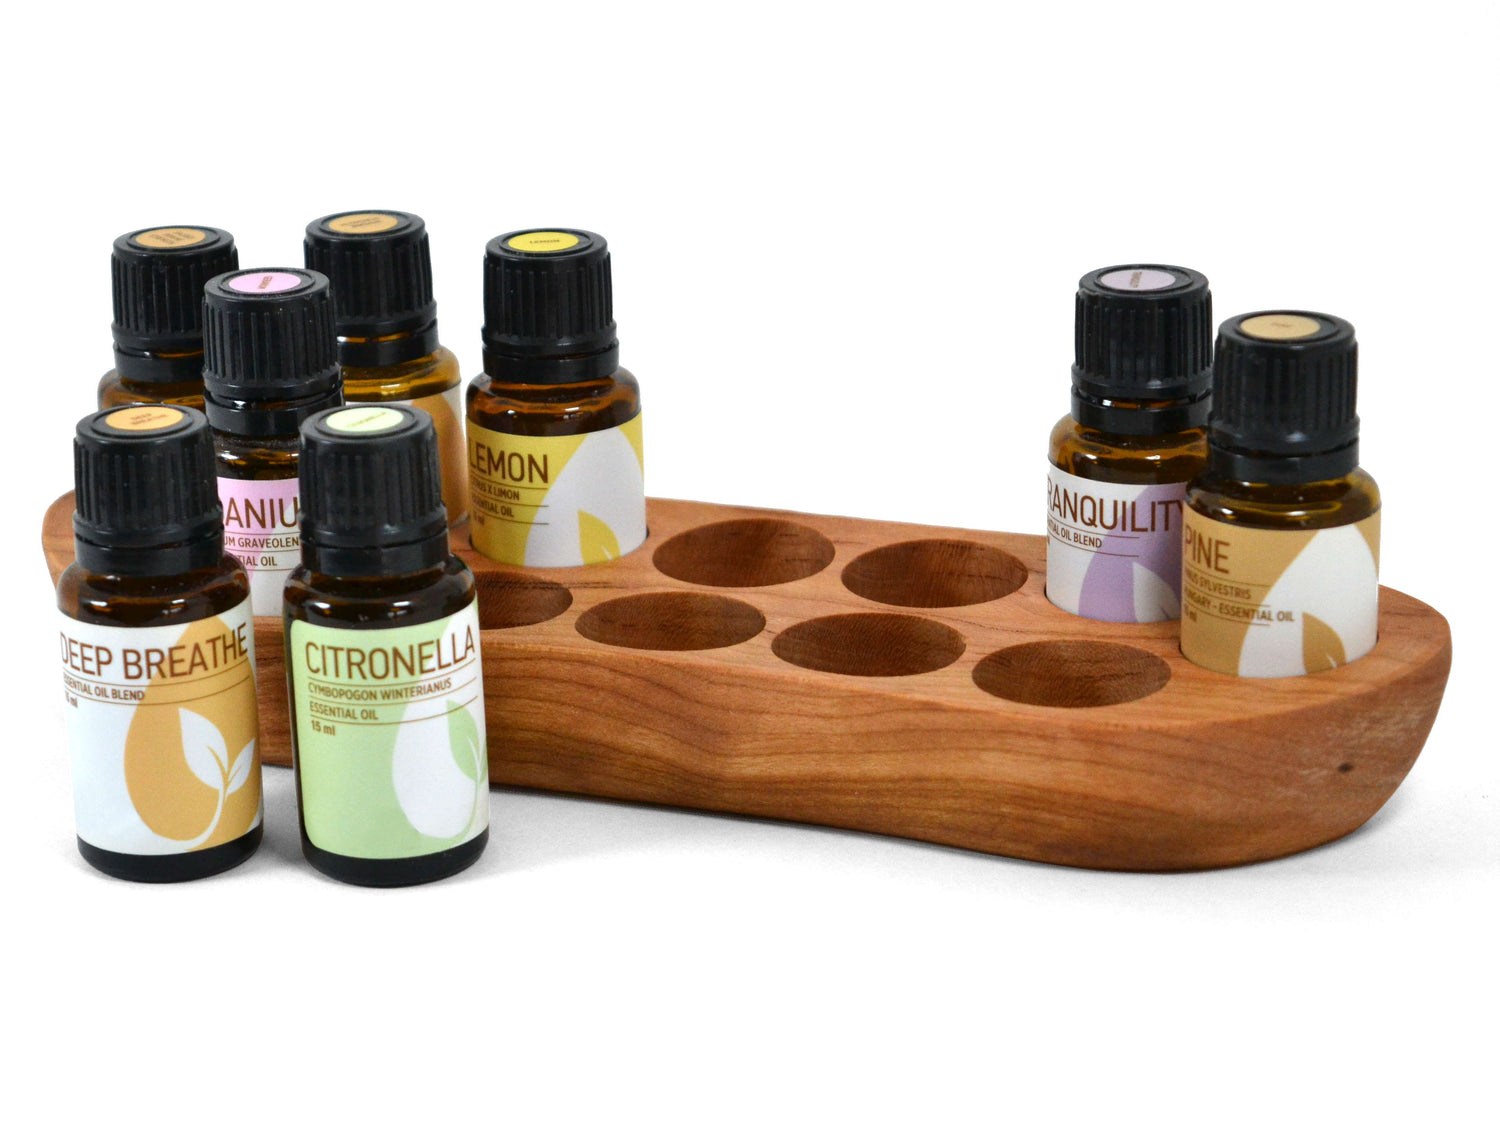 rocky mountain oils 15mL boat essential oils holder and display